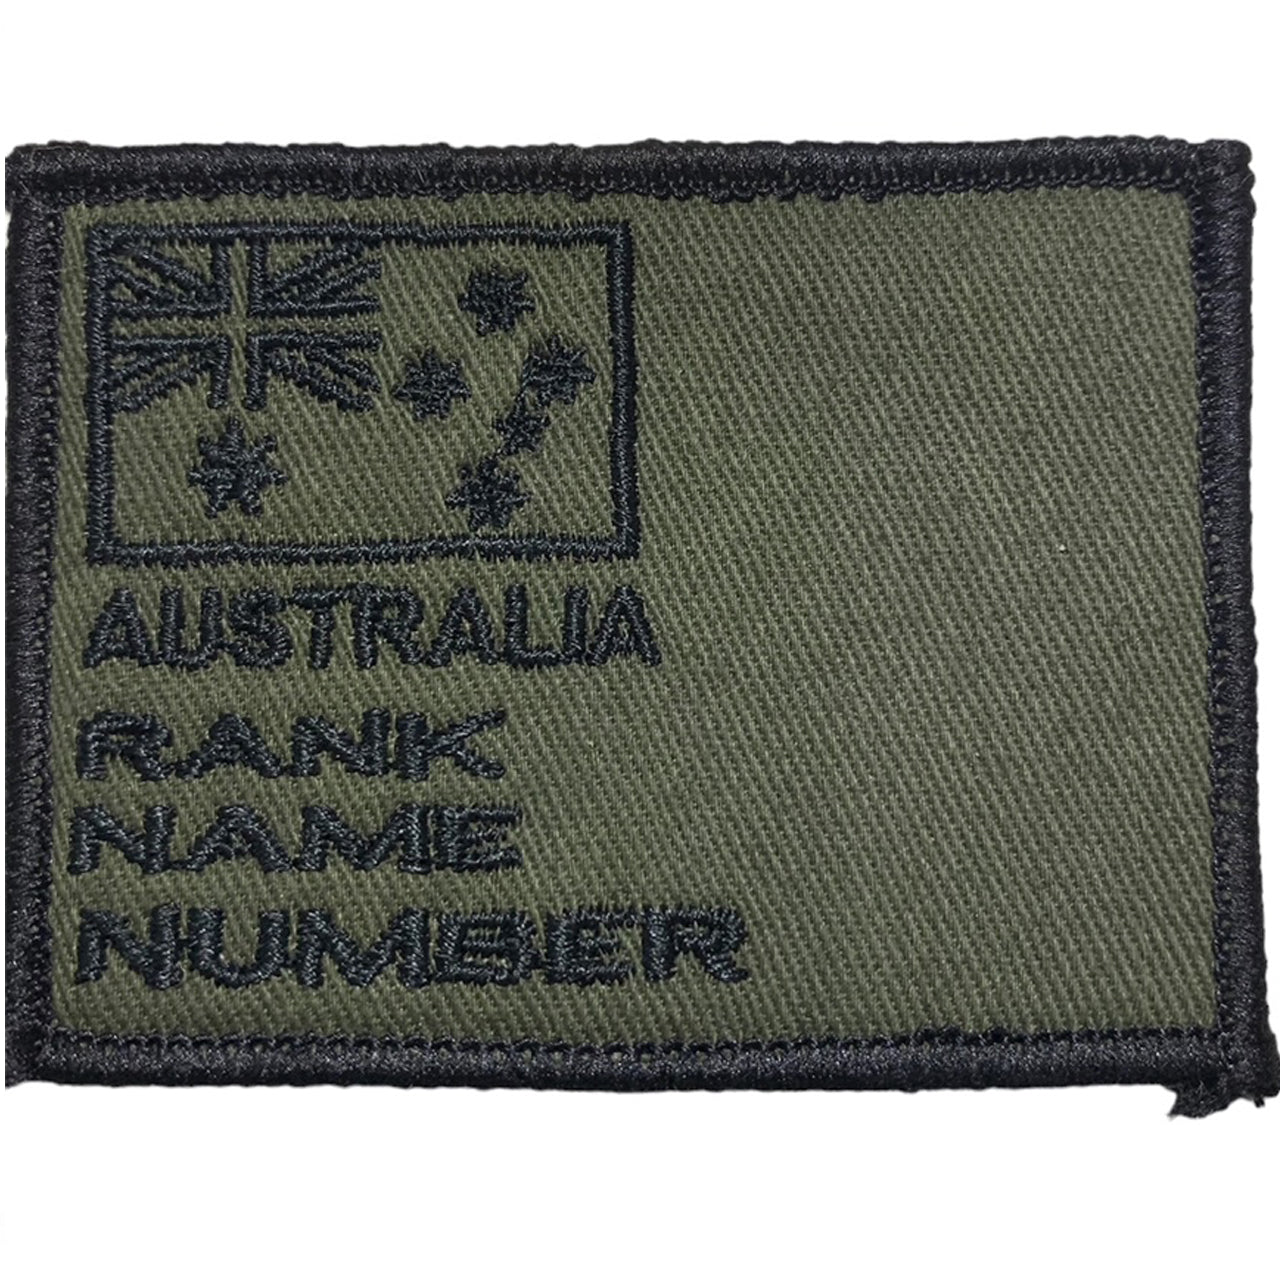 Australian Army Gear Patch in various colours for a bit of fun.  Some units are still using auscam, others are using AMCU but we had the idea to come up with a range of fun options as well. www.defenceqstore.com.au